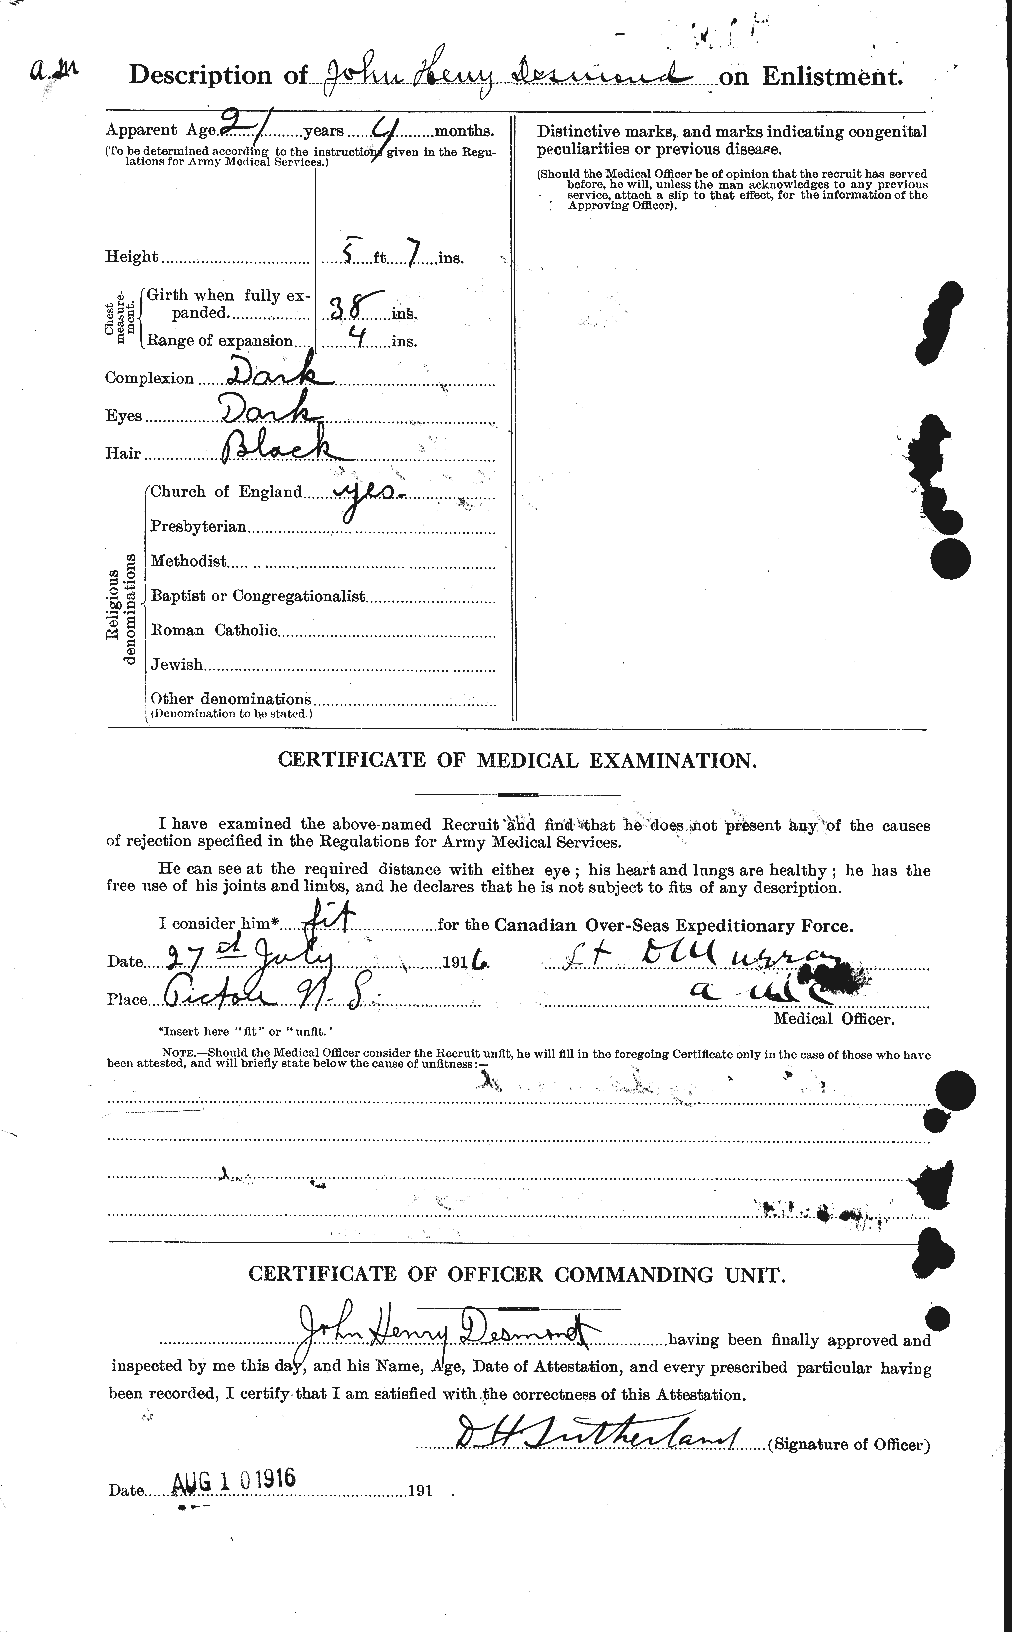 Personnel Records of the First World War - CEF 291353b